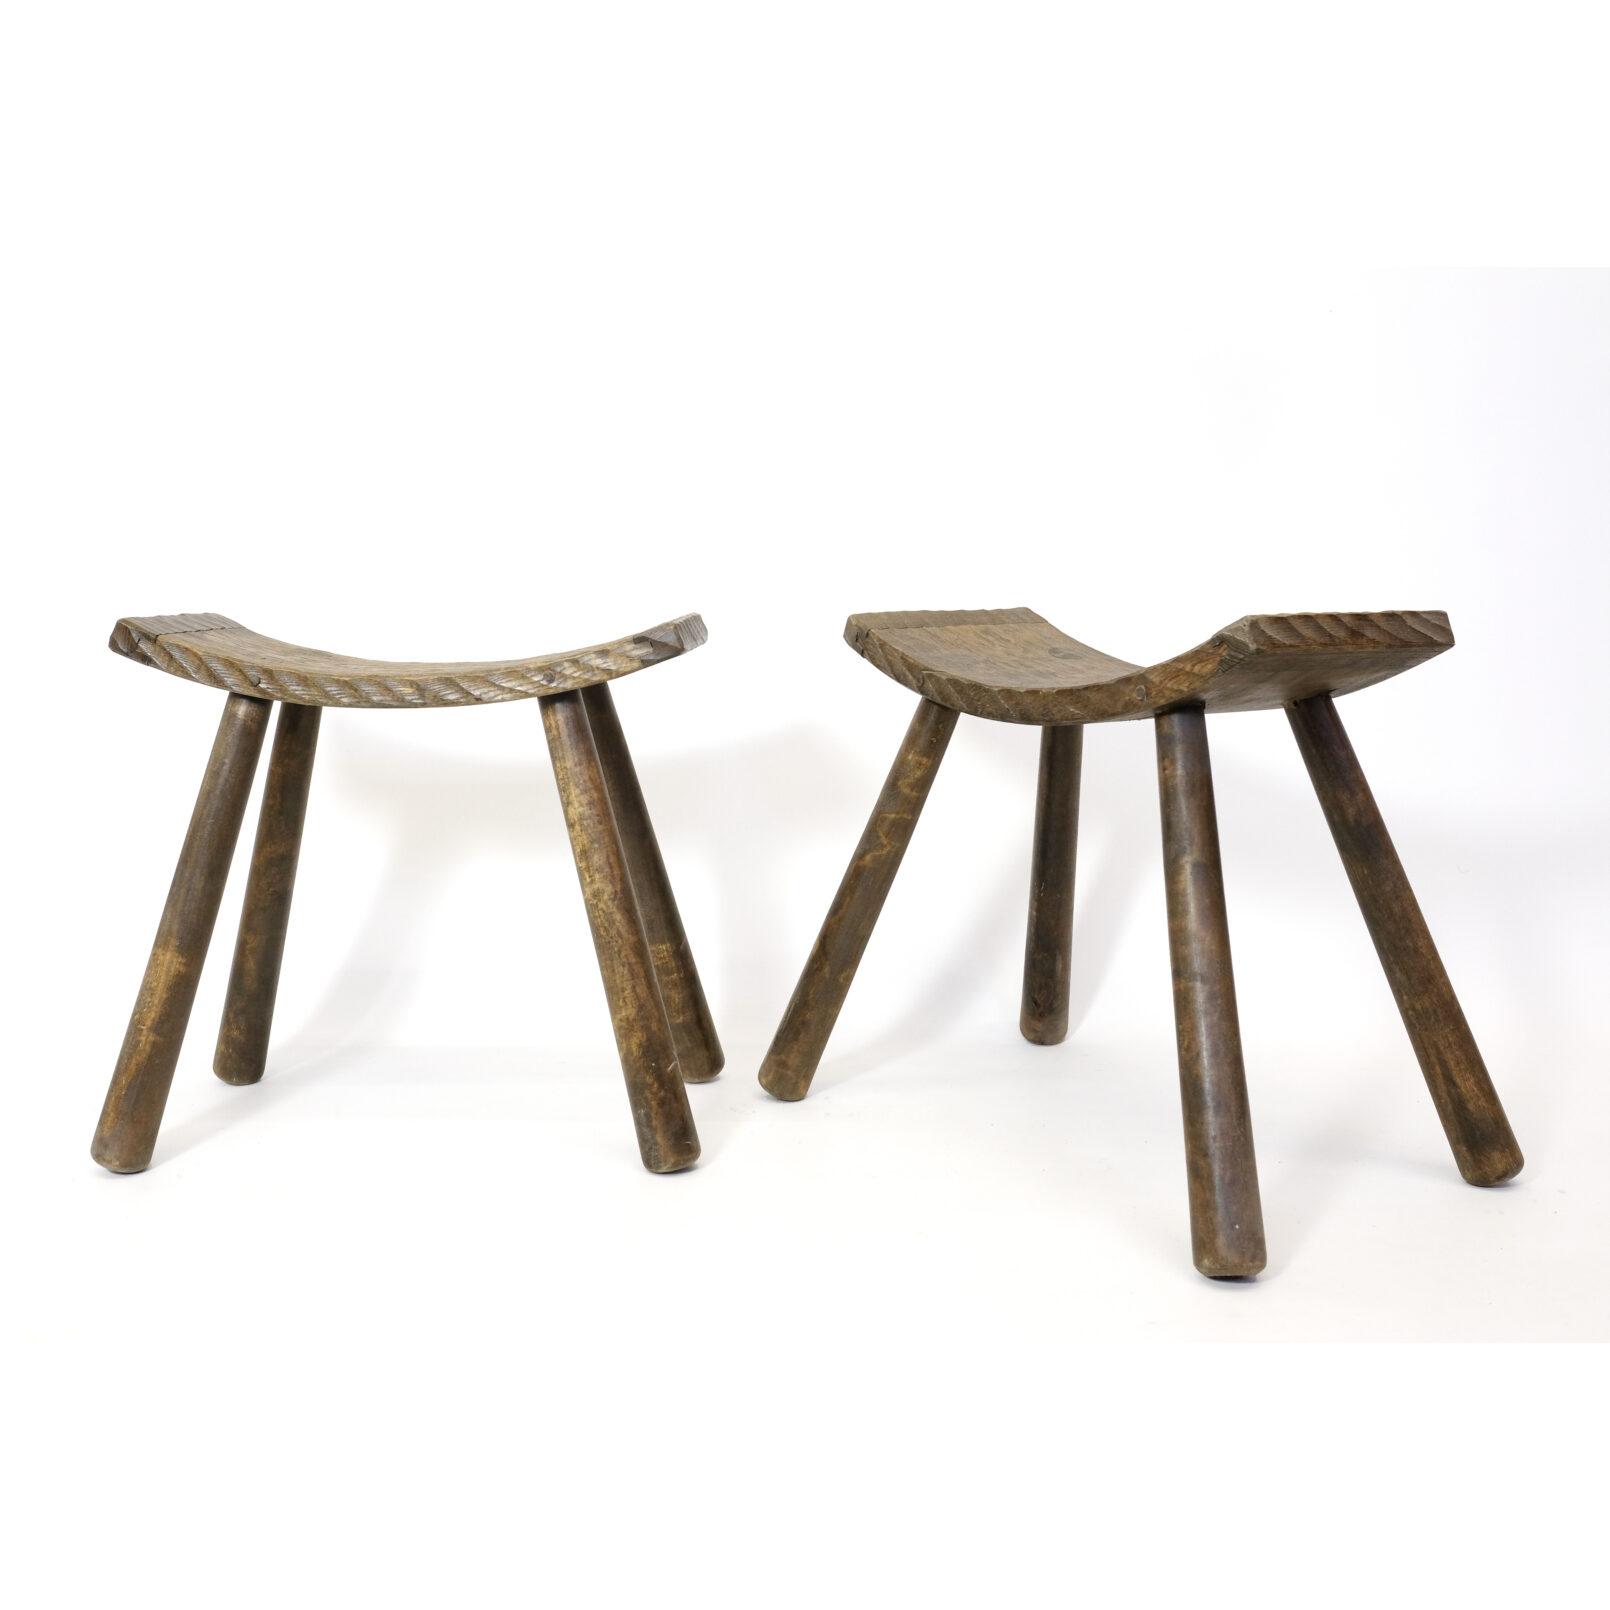 Pair of French handcrafted stools from the sixties.